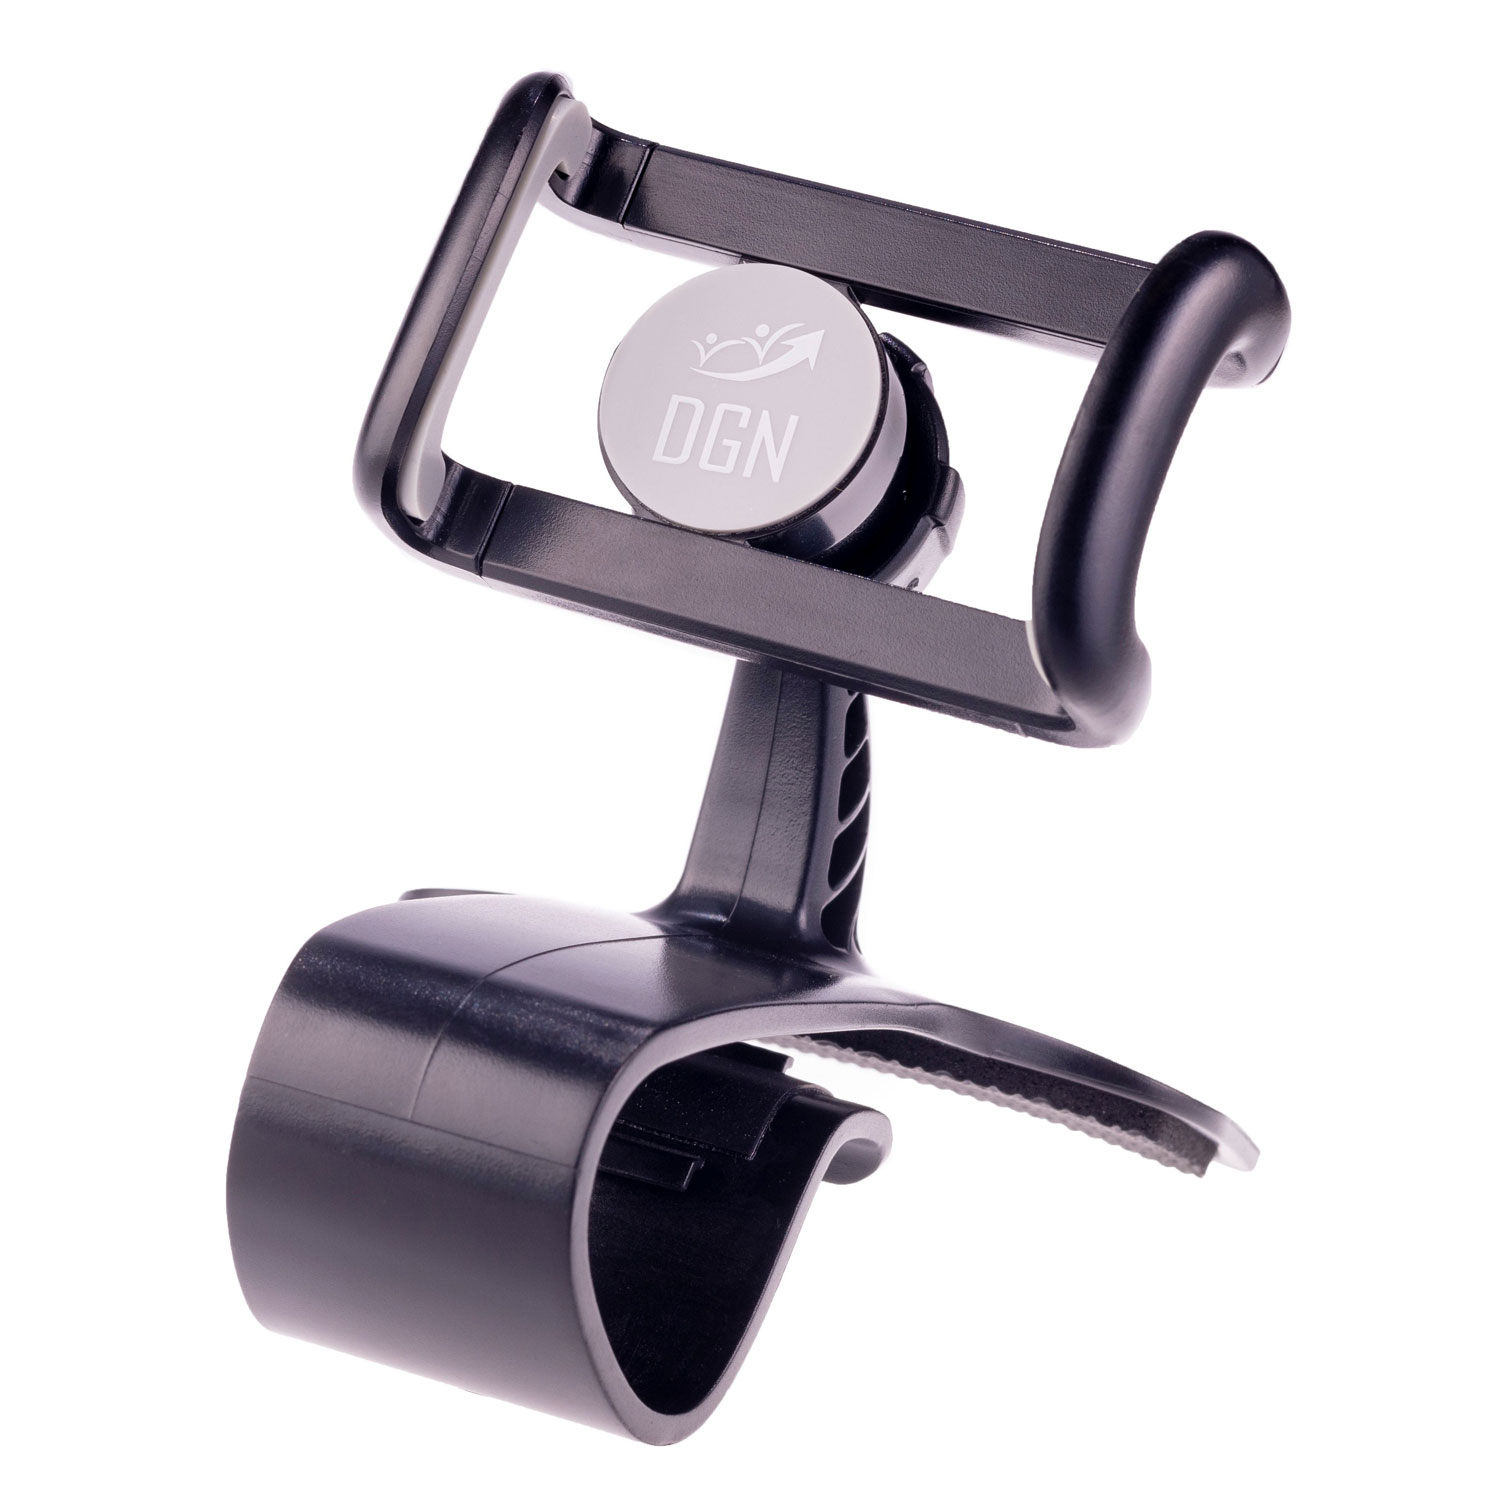 DGN Universal 360 Degree Dashboard Car Mount for Smartphones-2 Pack